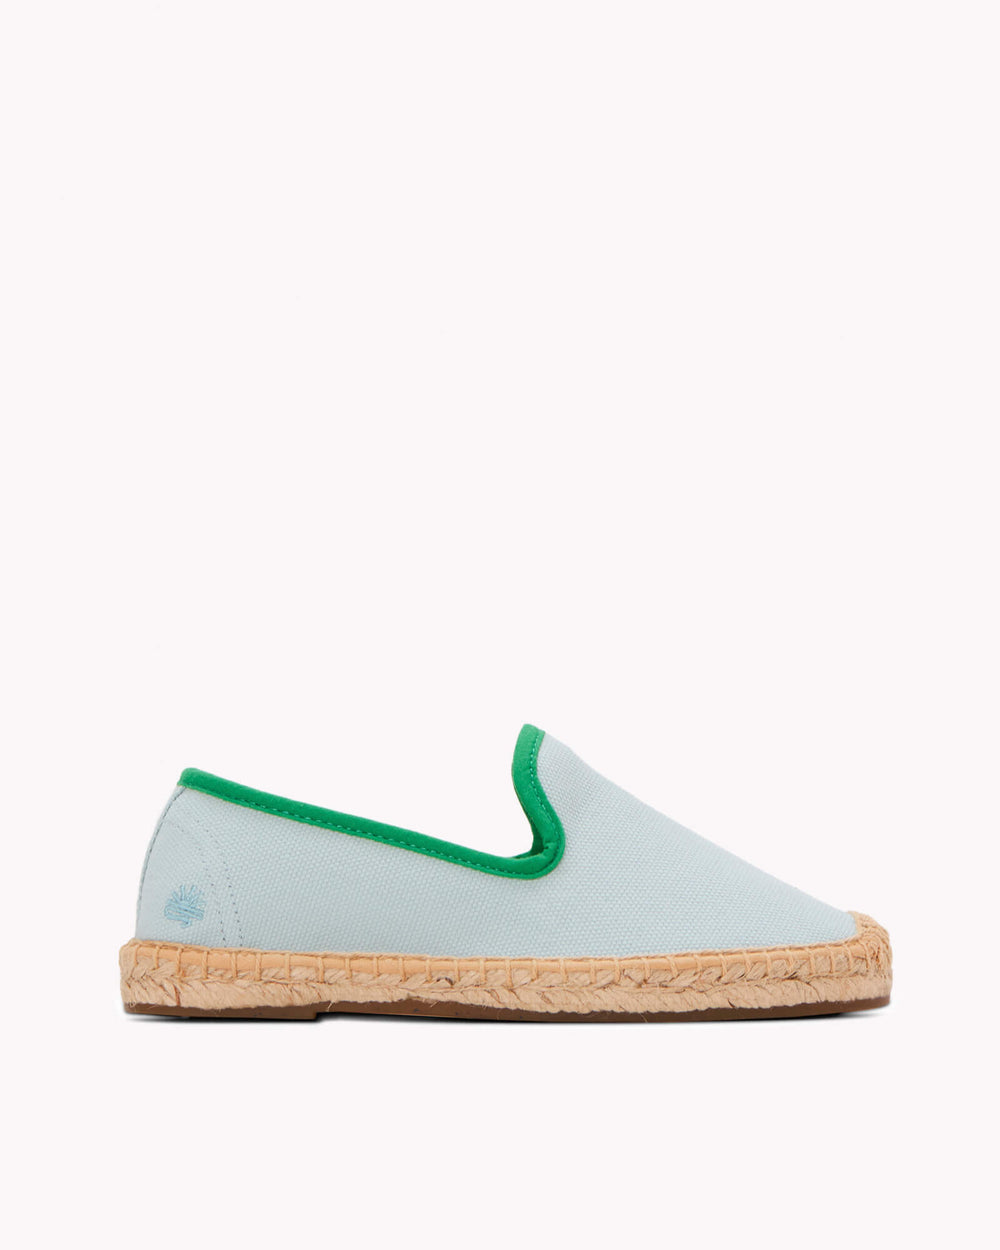 Kids mint espadrille shoes with green piping on gray background